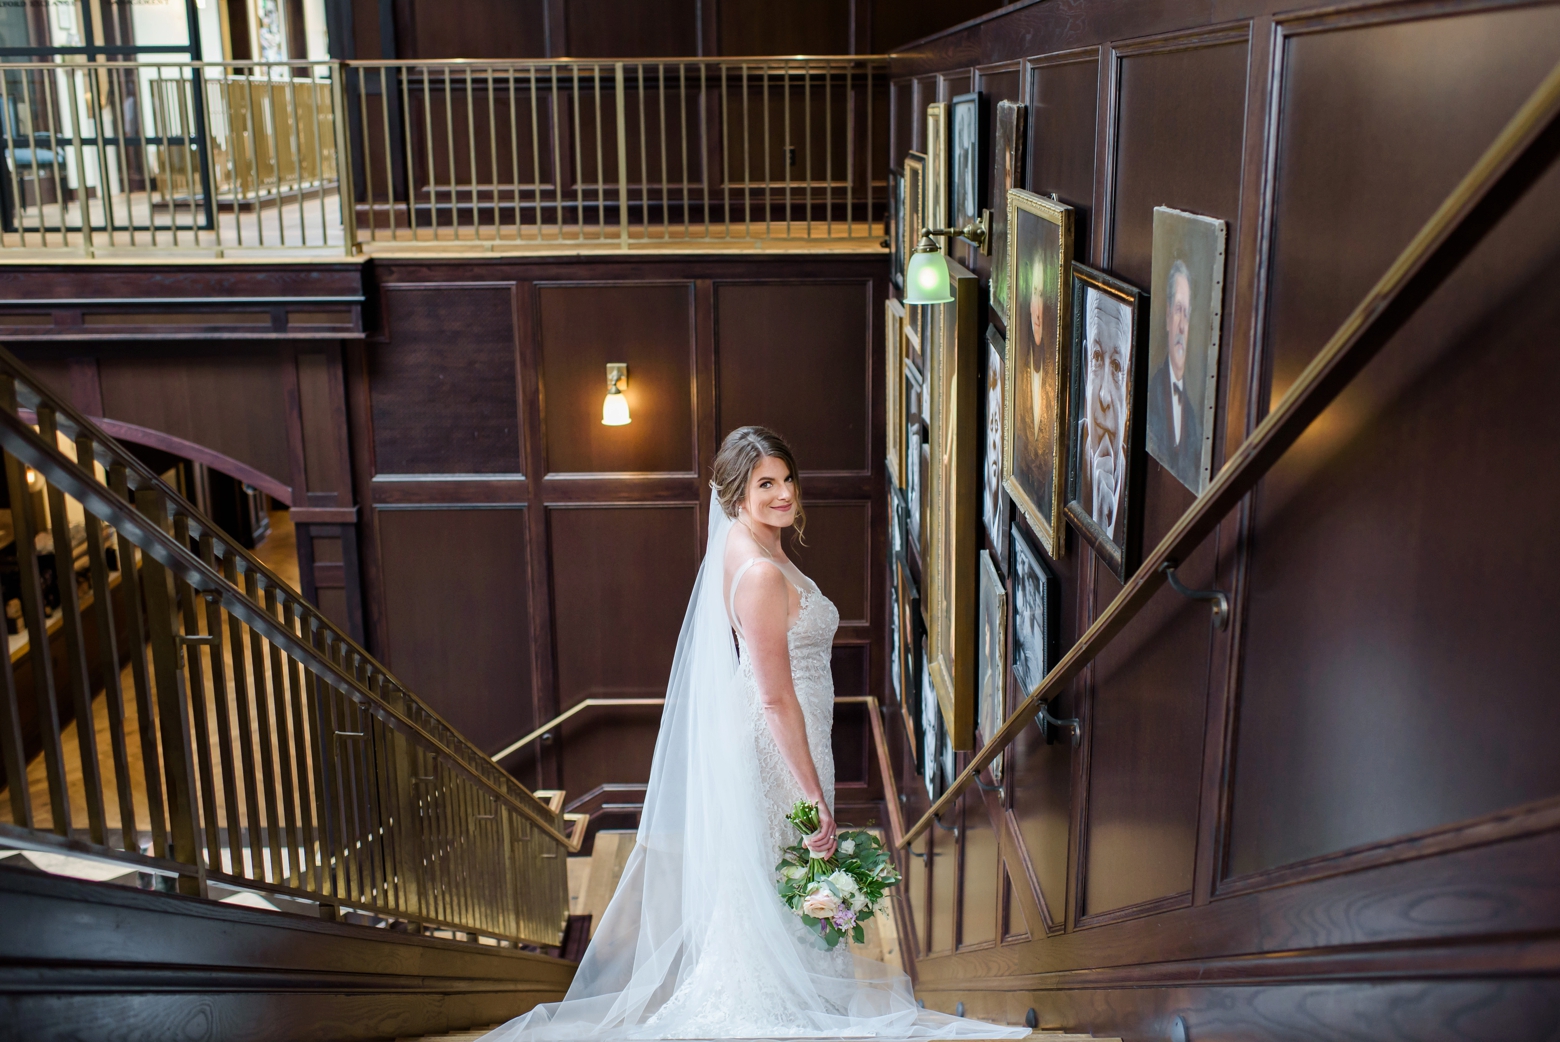 A bride wears a cathedral veil and strapped wedding gown while standing on a staircase